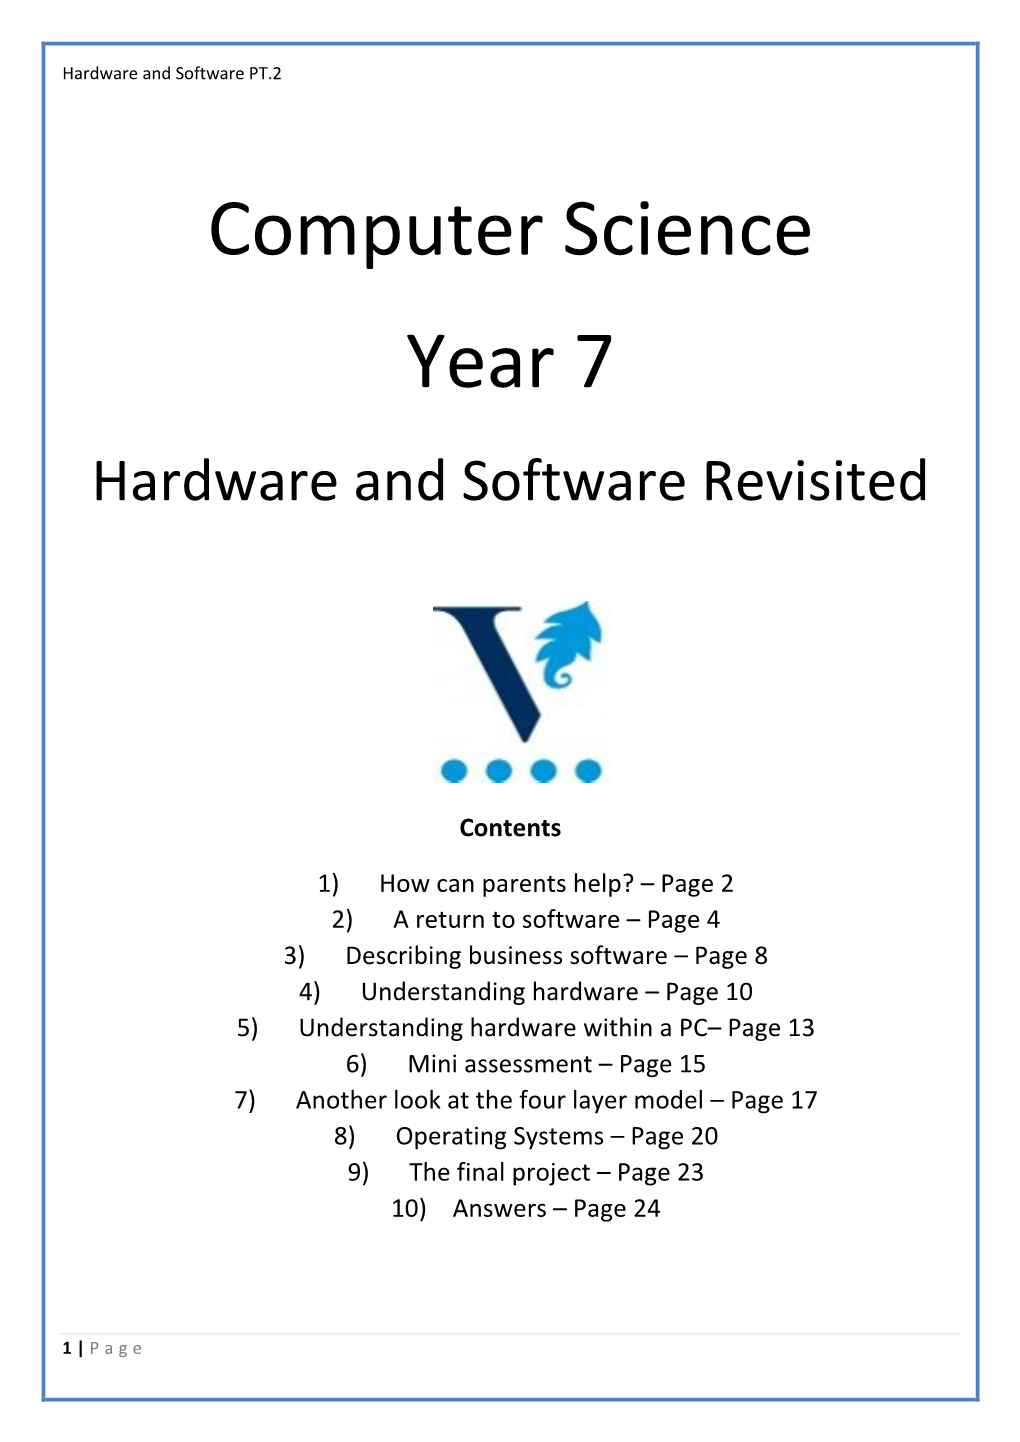 Computer Science Year 7 Hardware and Software Revisited